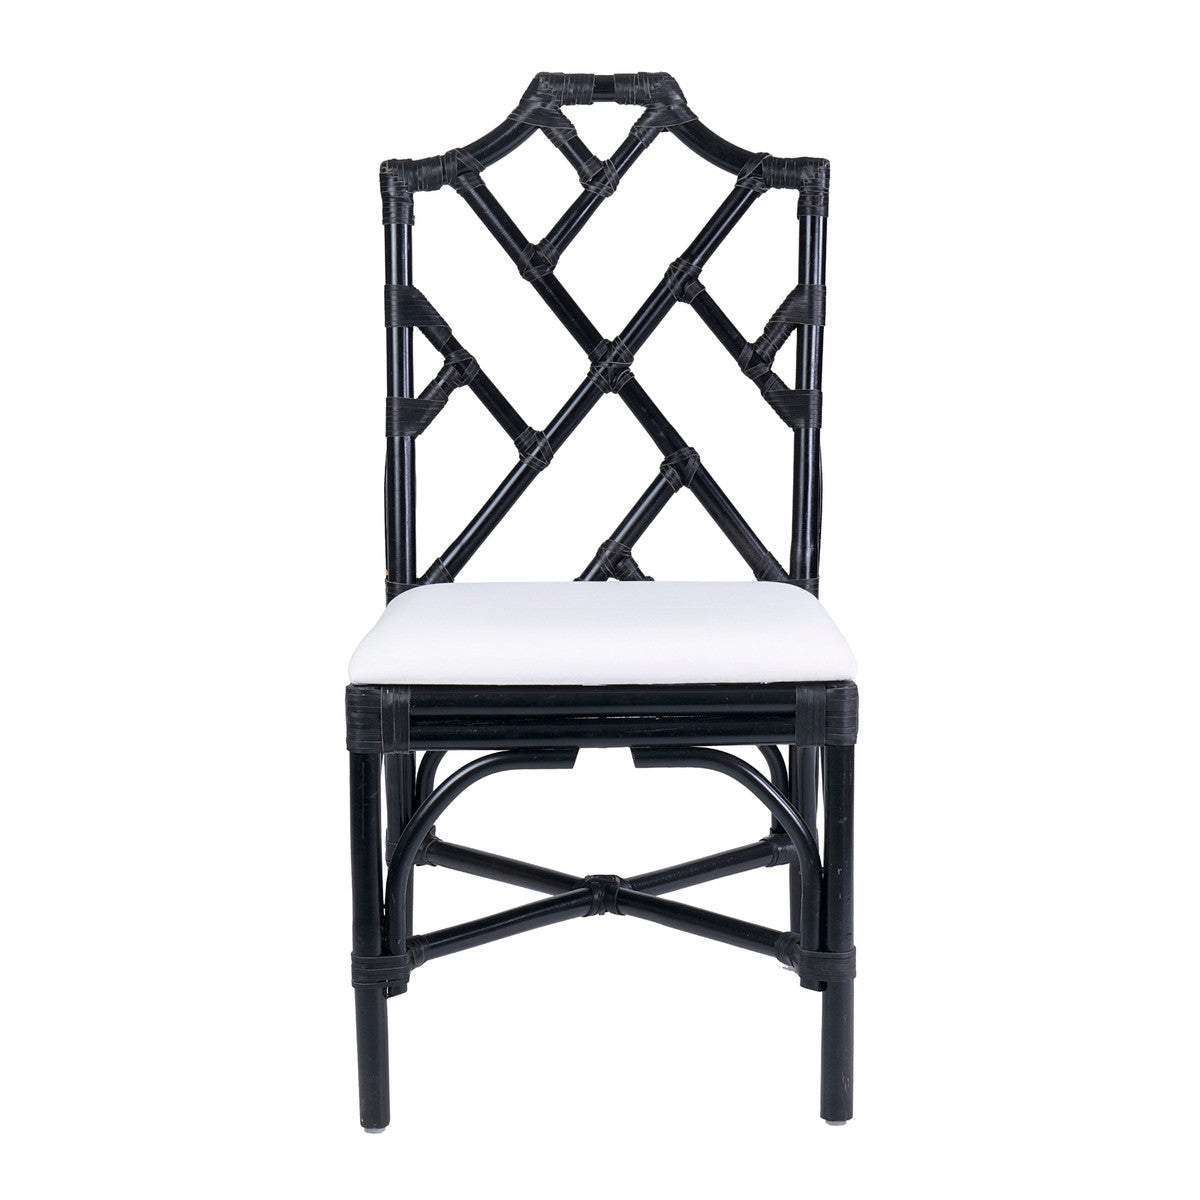 EMERY CHIPPENDALE RATTAN SIDE CHAIRS, SET OF 2 (PRICE IS PER PAIR)